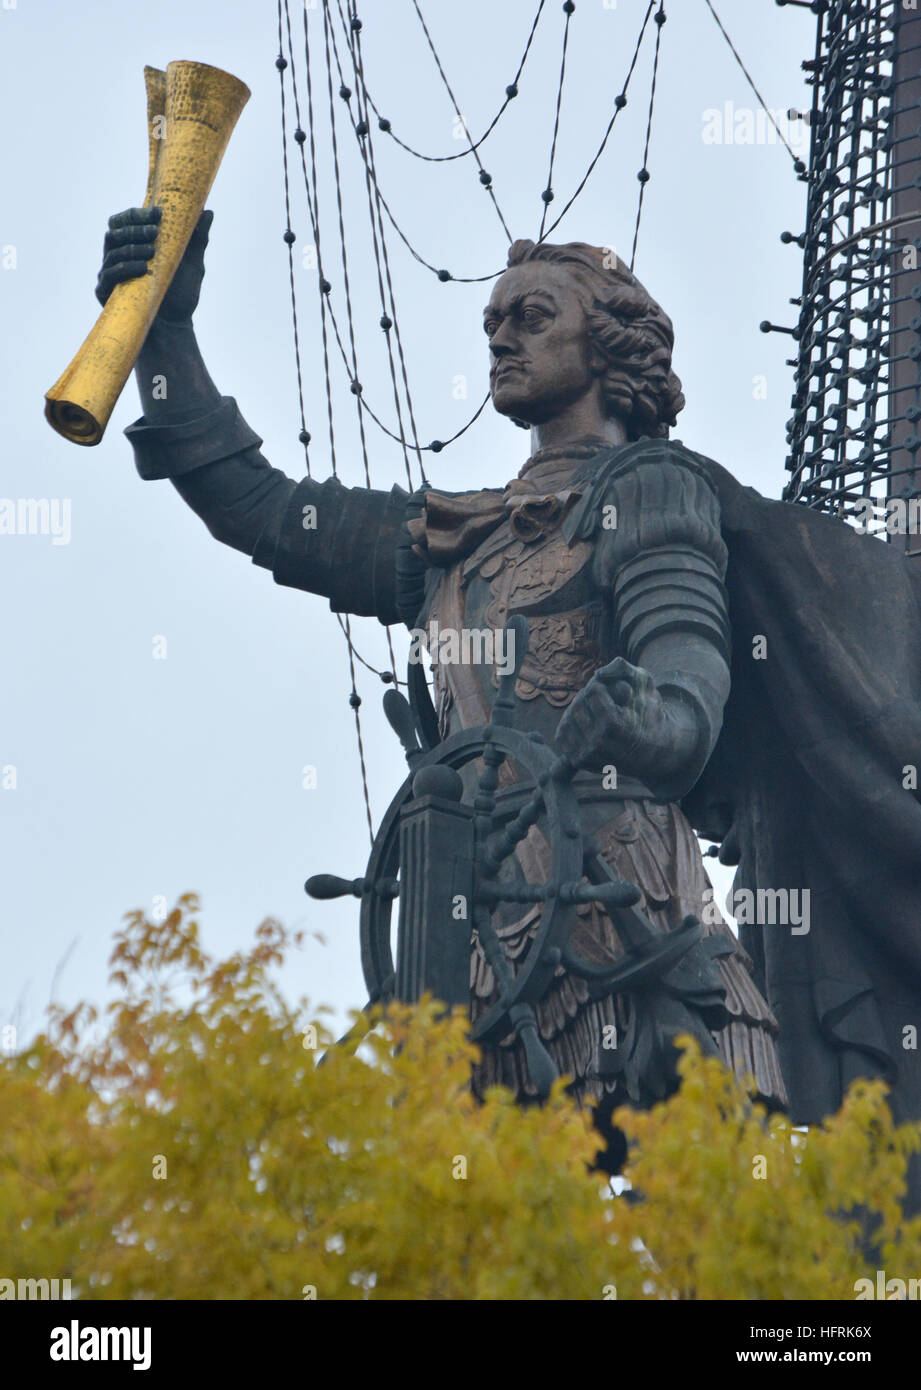 Statue of Peter The Great, founder of the Russian Navy, from the Garden of the Fallen Heroes, Moscow, Russia Stock Photo